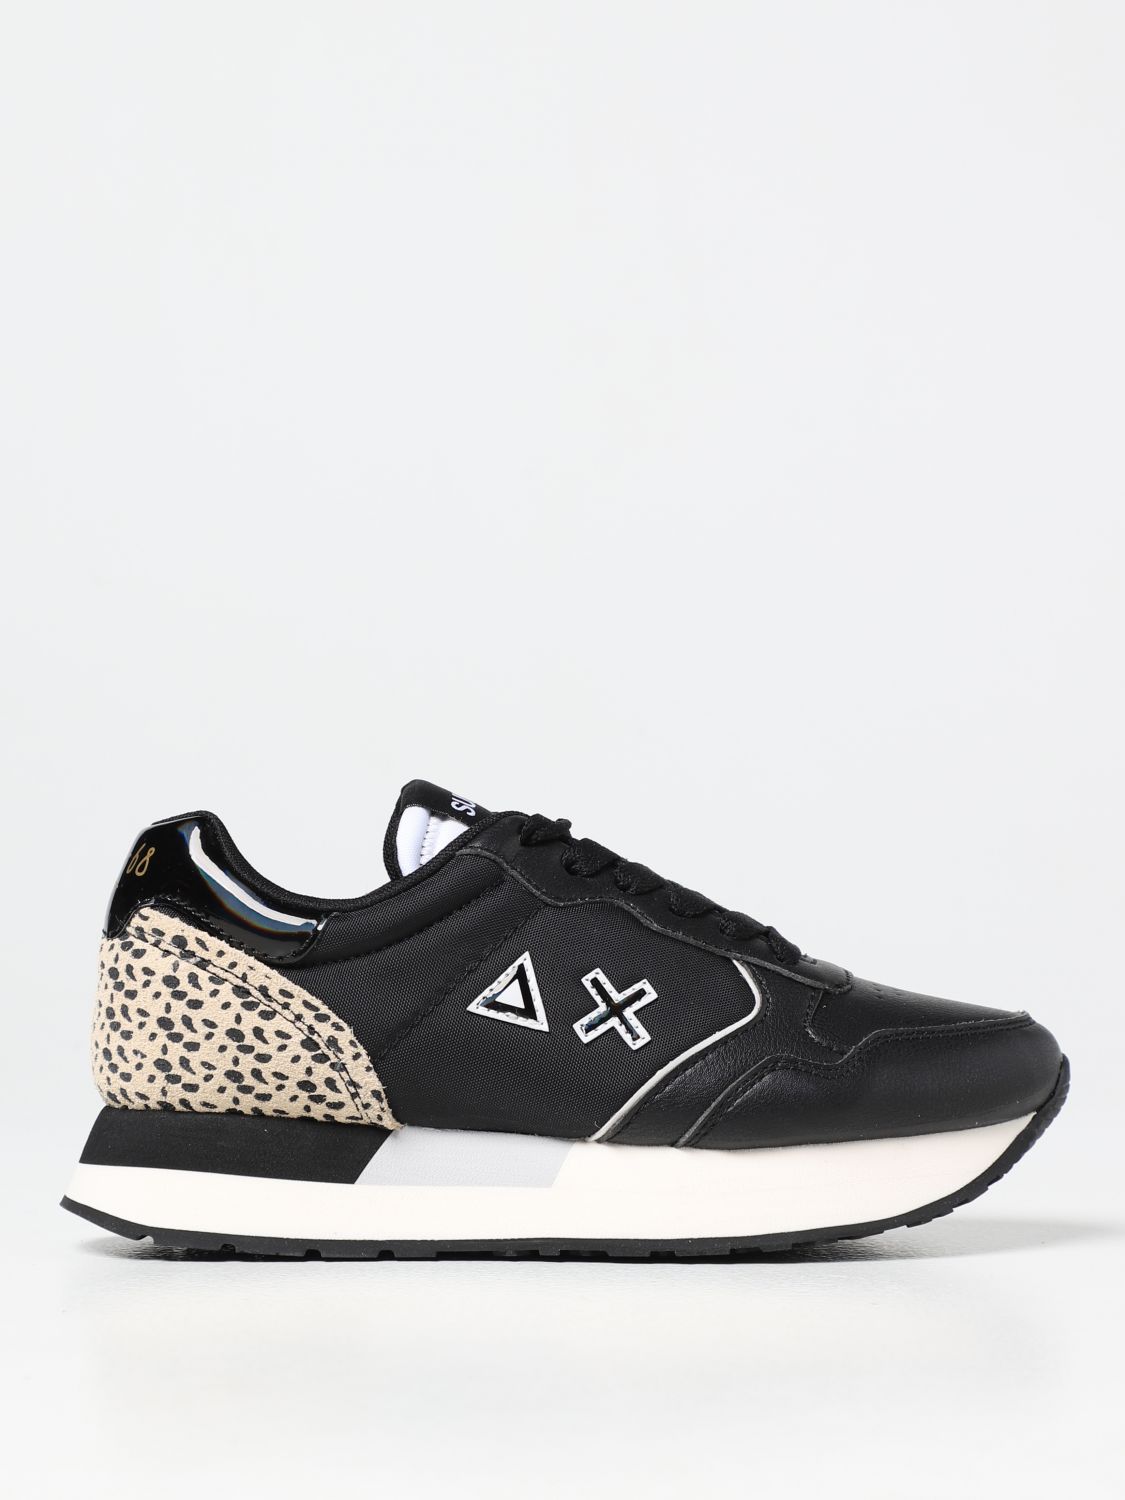 SUN 68: Kelly sneakers in leather and fabric - Black | Sun 68 sneakers ...